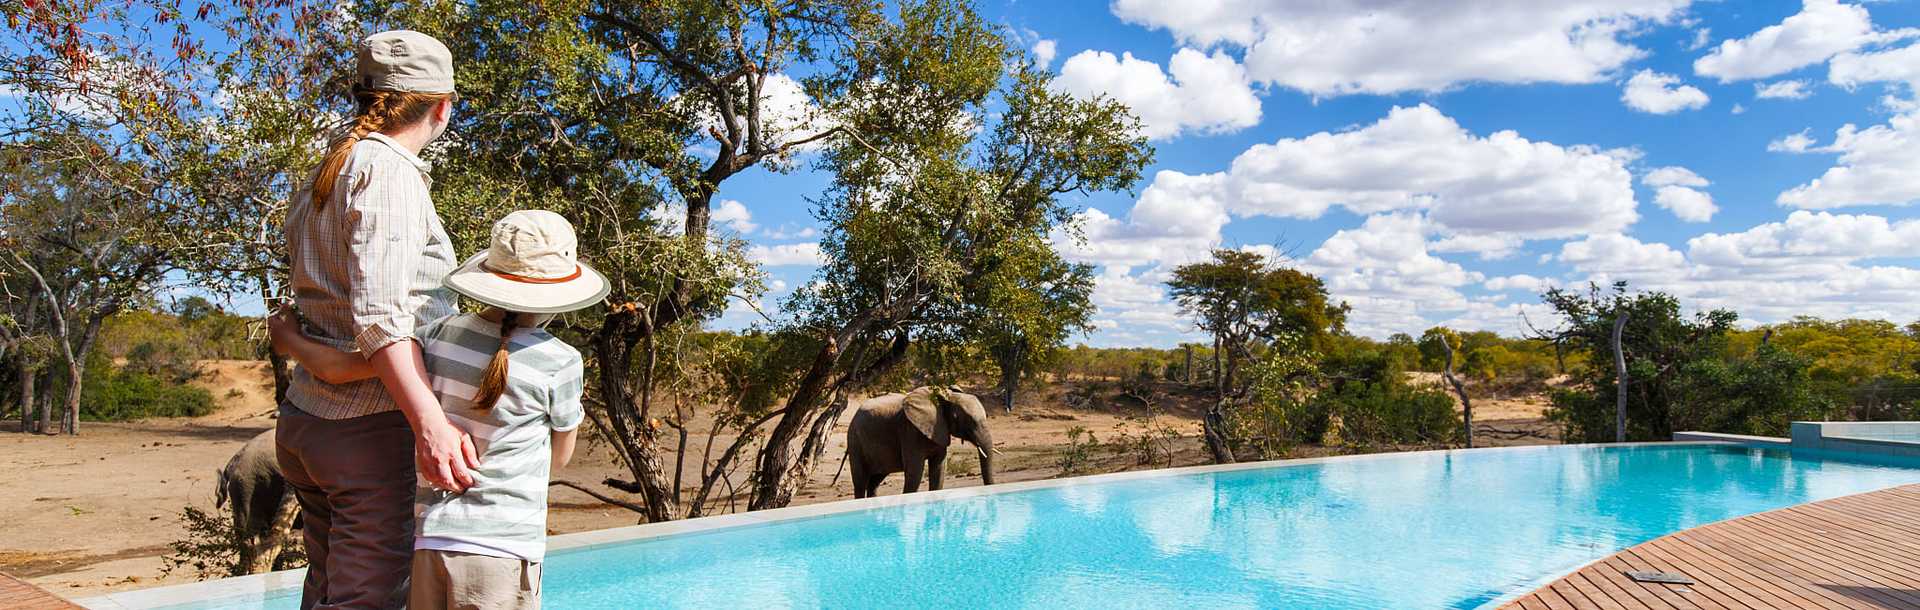 Family by the pool watching elephants at a luxury lodge in South Africa.